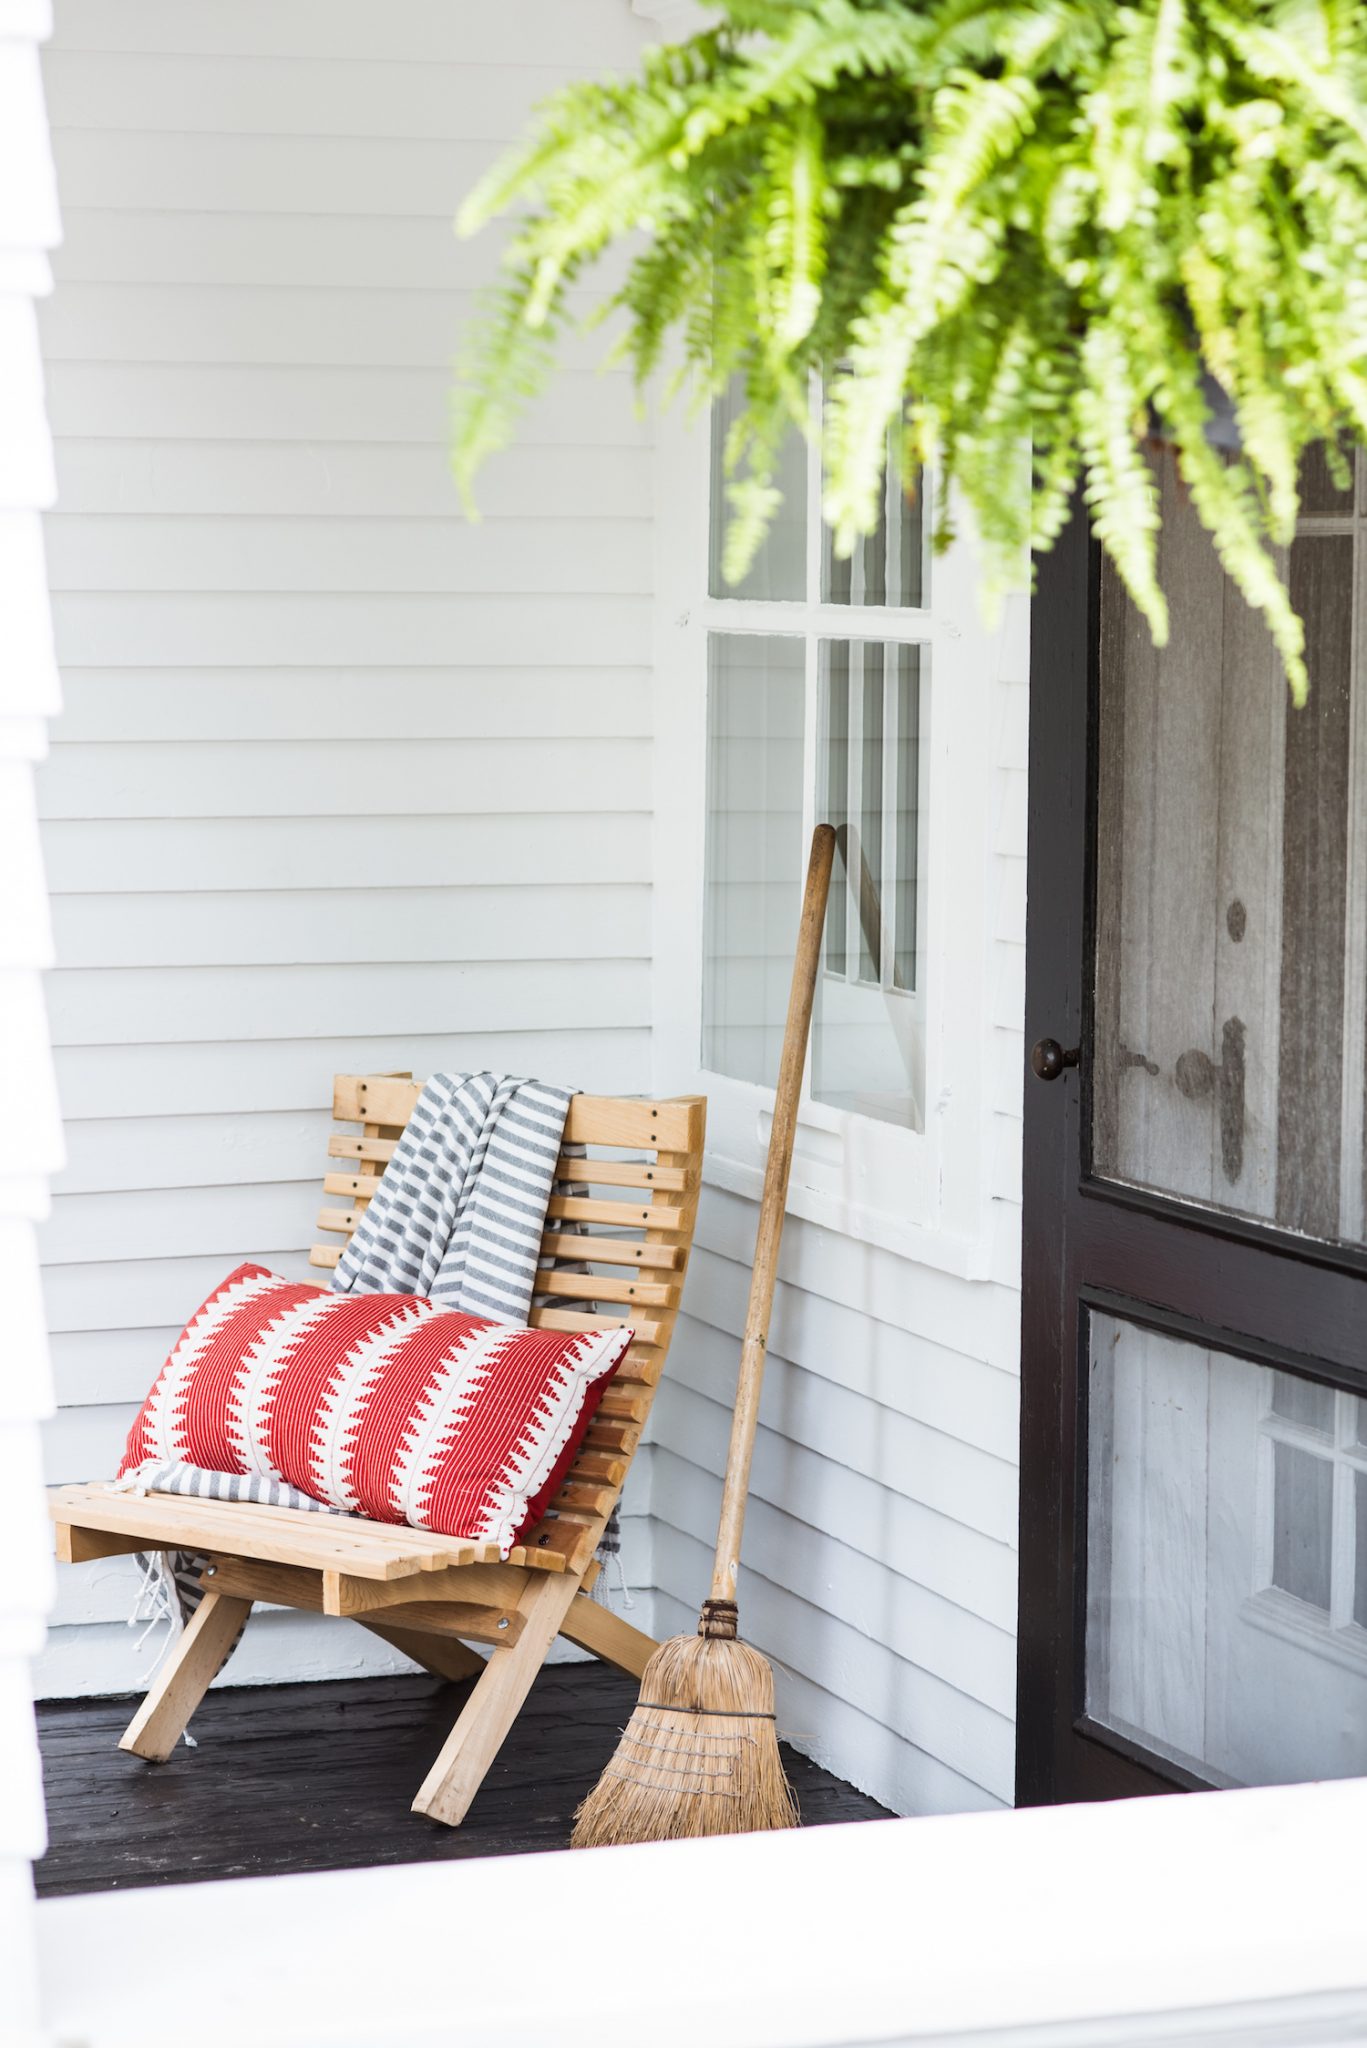 The Sweetest Occasion's Backyard Makeover | Home decor, home renovation ideas, patio ideas and more from @cydconverse